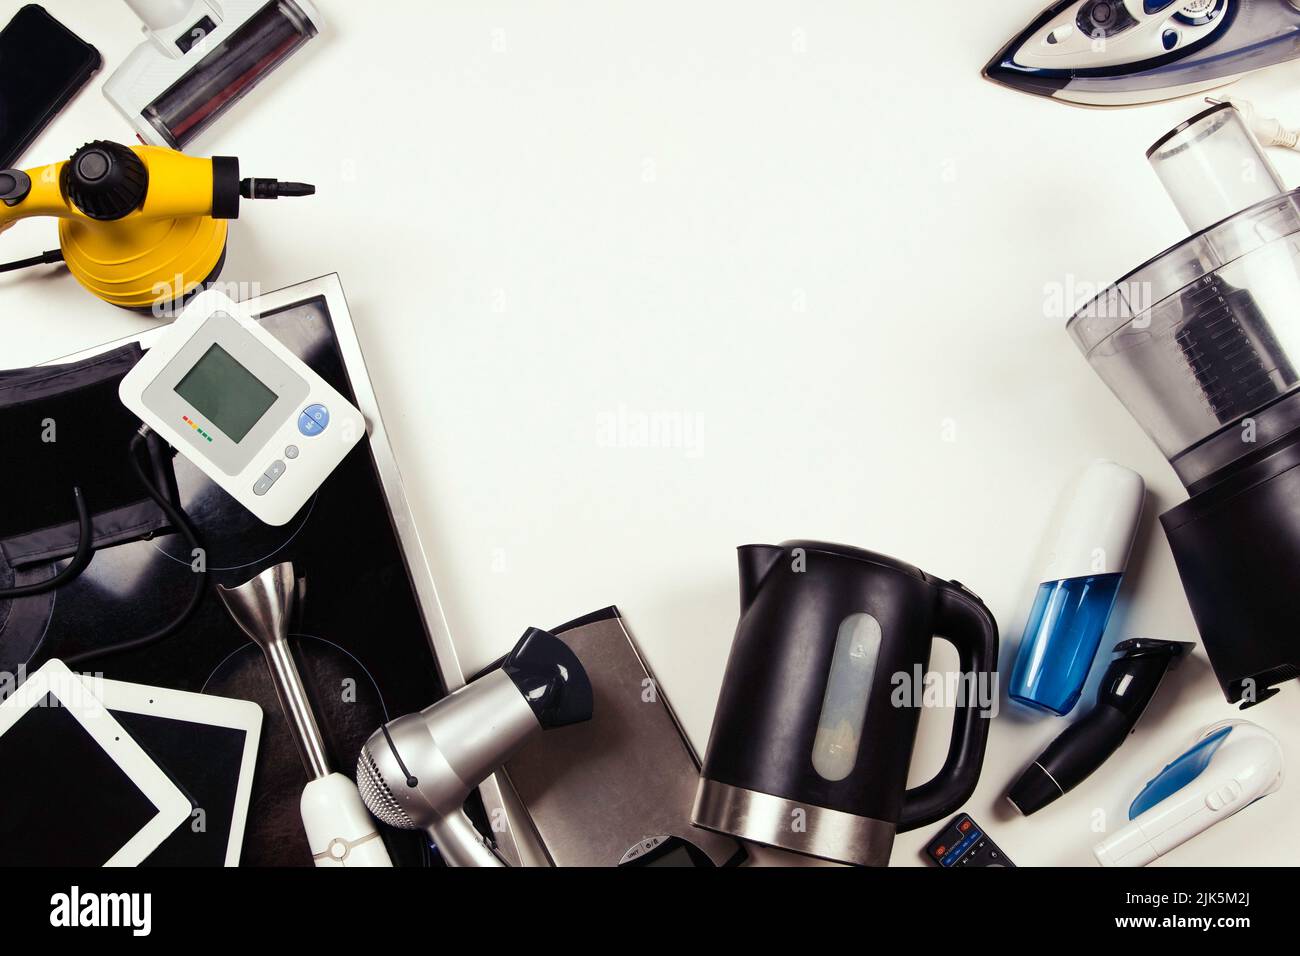 https://c8.alamy.com/comp/2JK5M2J/old-household-electrical-appliances-broken-computers-tablets-phones-used-electronic-gadgets-devices-on-white-background-planned-obsolescence-2JK5M2J.jpg